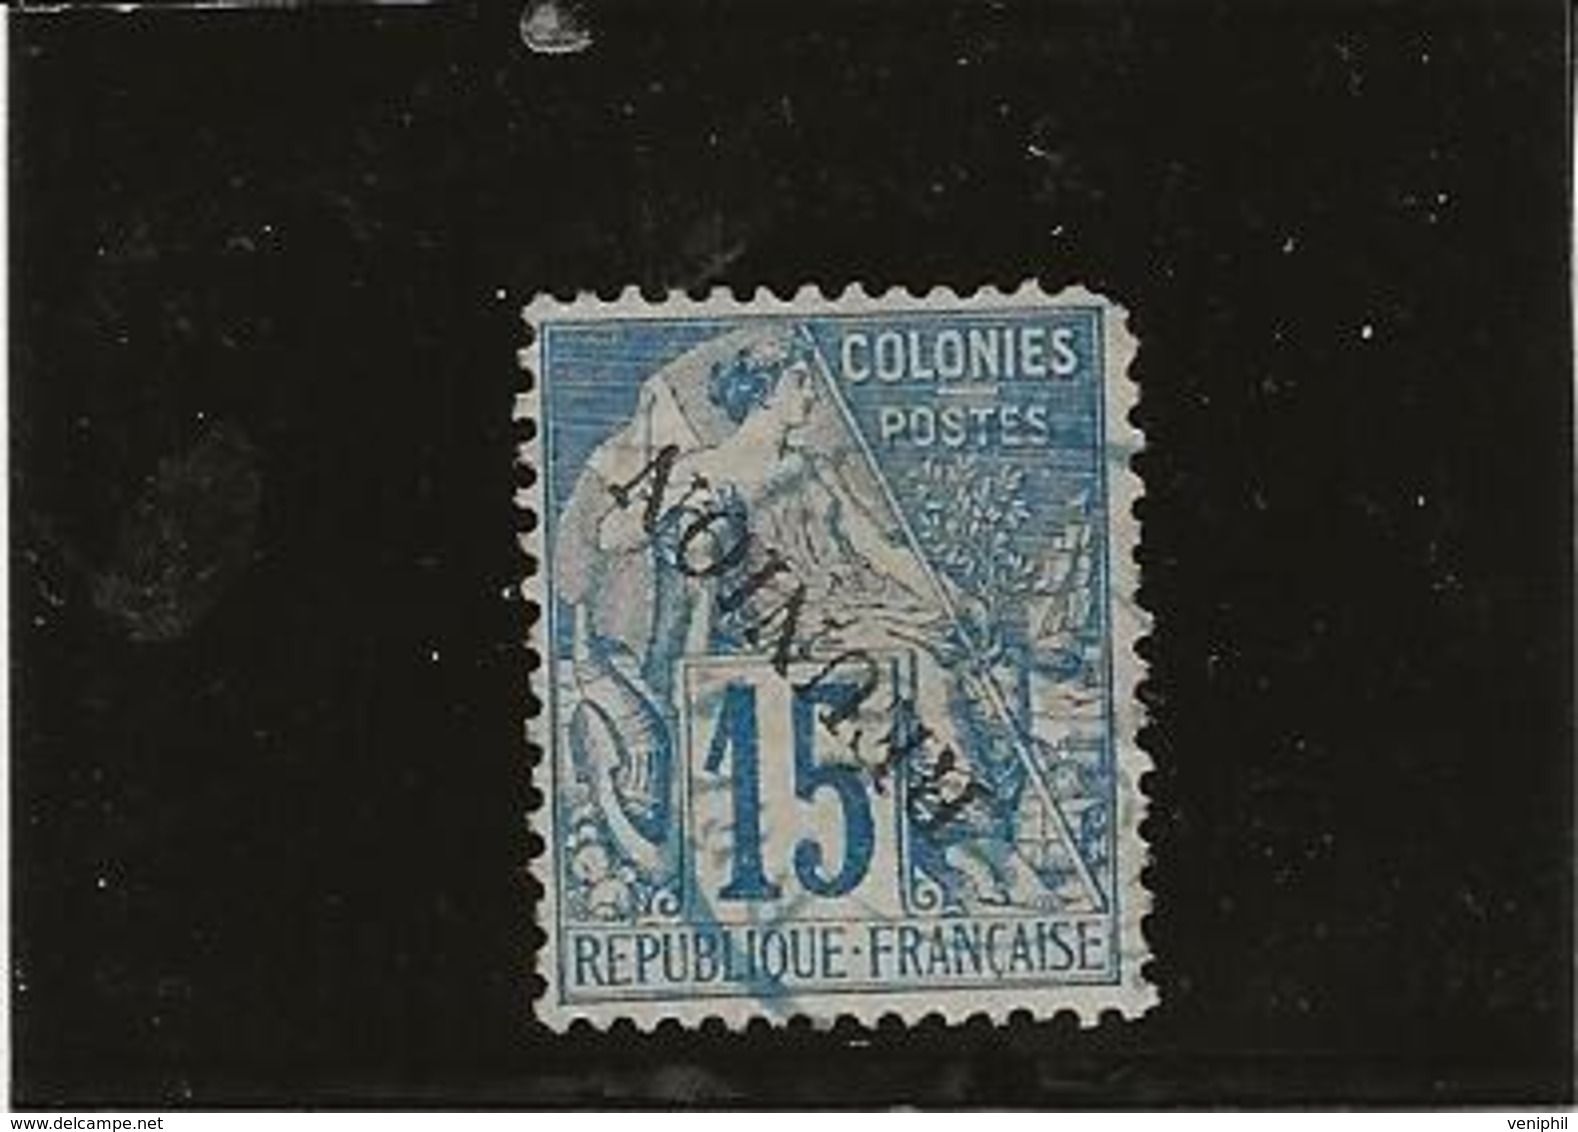 REUNION - VARIETE DU N° 22 -SURCHARGE RENVERSEE - ANNEE 1891 - DENT COURTE ANGLE SUP DROIT -COTE :150 € - Used Stamps